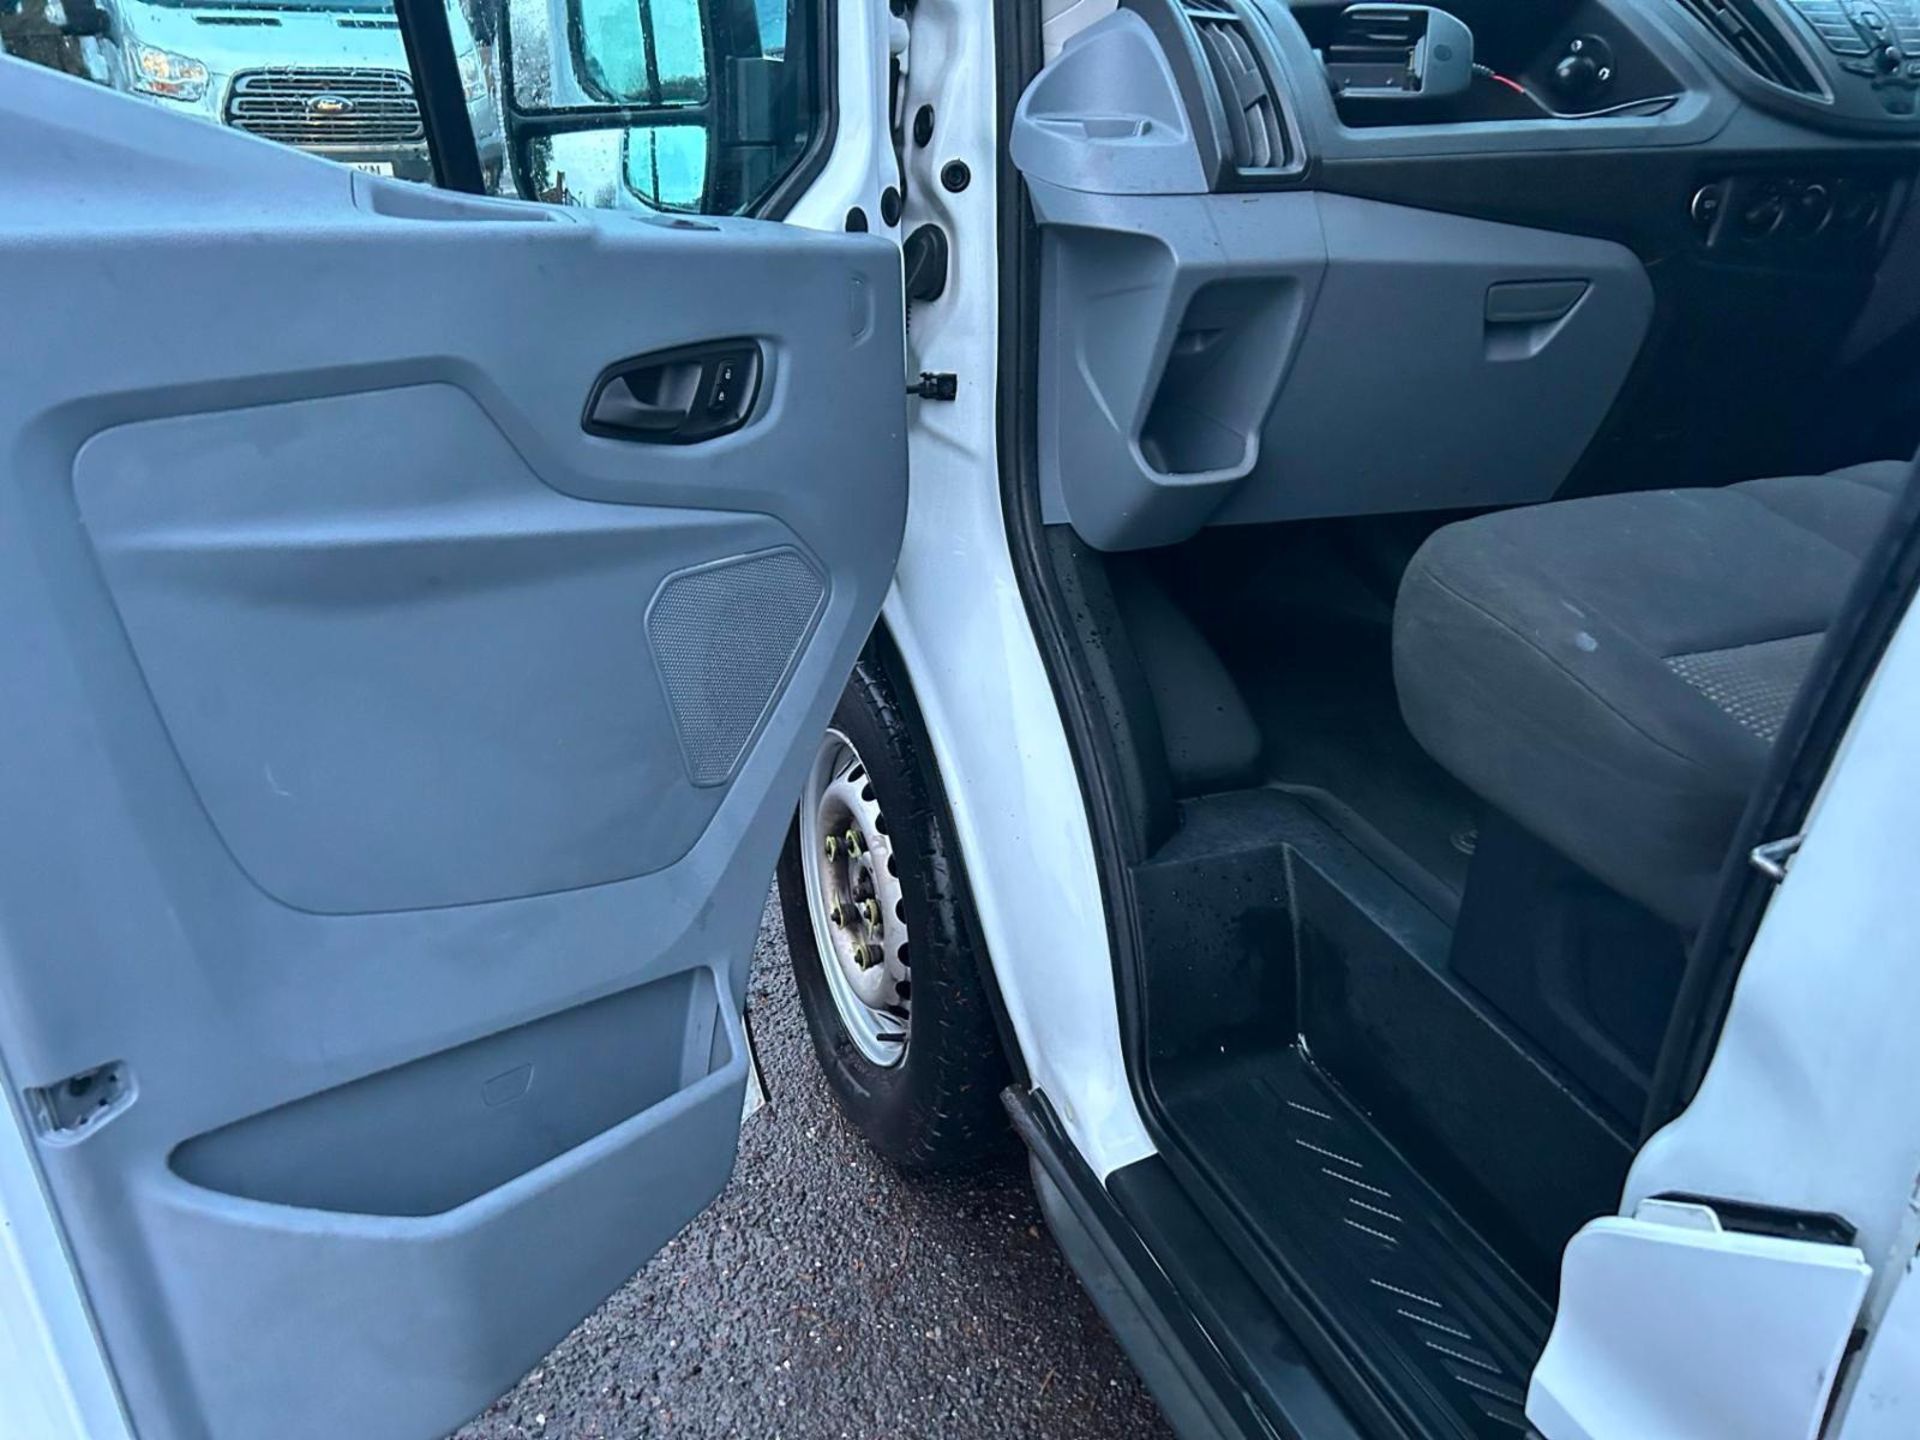 2018 FORD TRANSIT 2.0 TDCI 130PS L3 H3 - RELIABLE AND EFFICIENT PANEL VAN! - Image 6 of 14